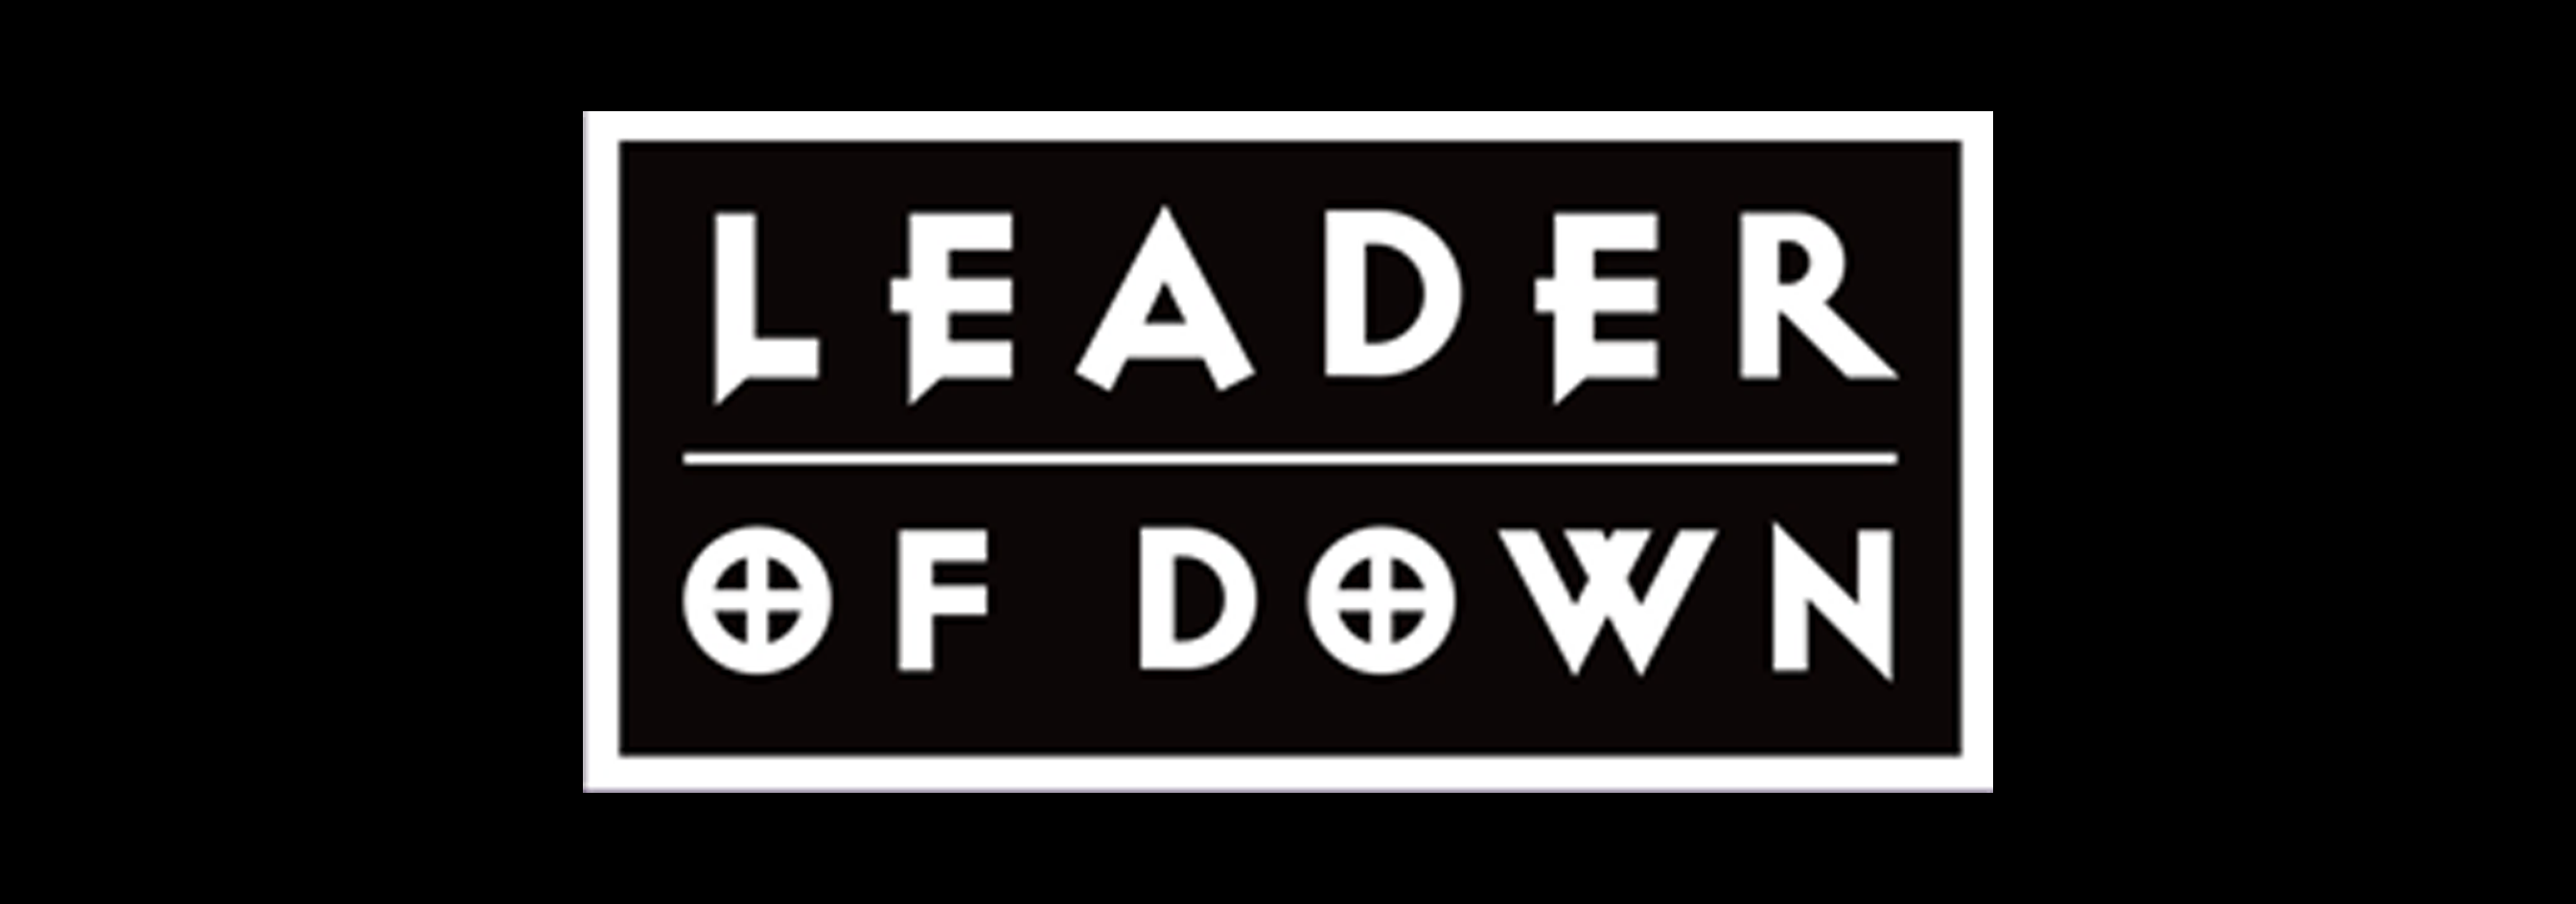 Leader Of Down